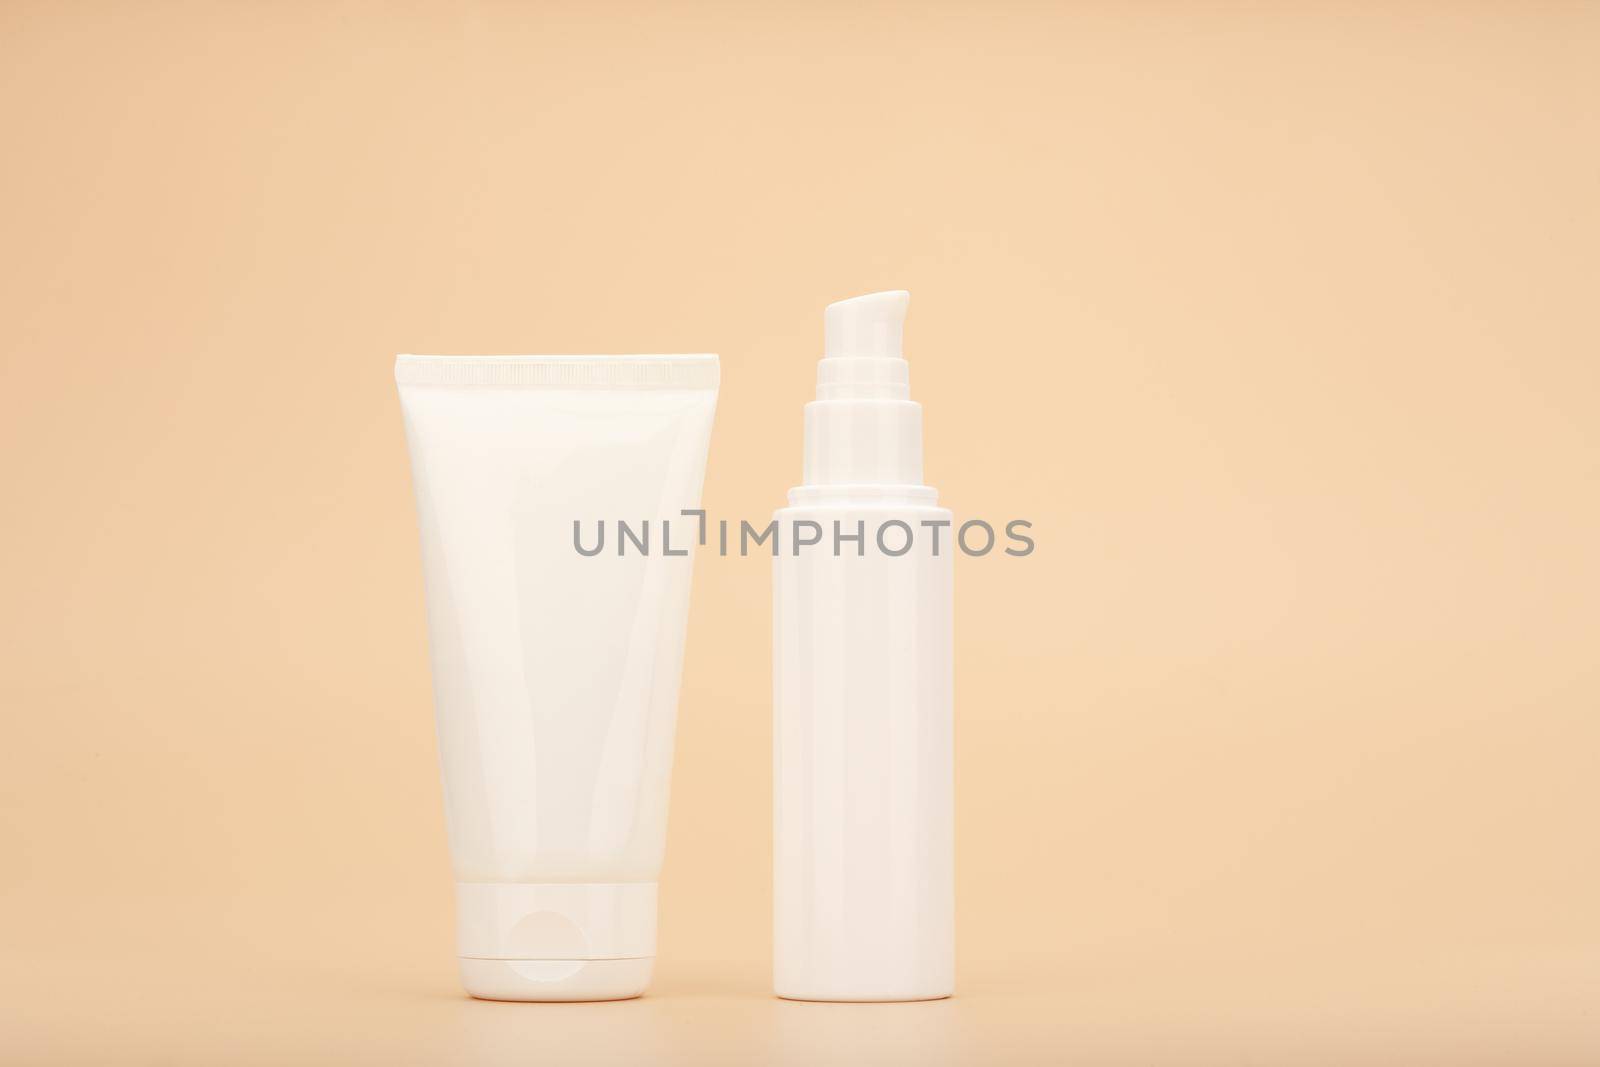 Moisturizing care for face and hands skin. Concept of skin care and beauty. Cream tubes against beige background by Senorina_Irina